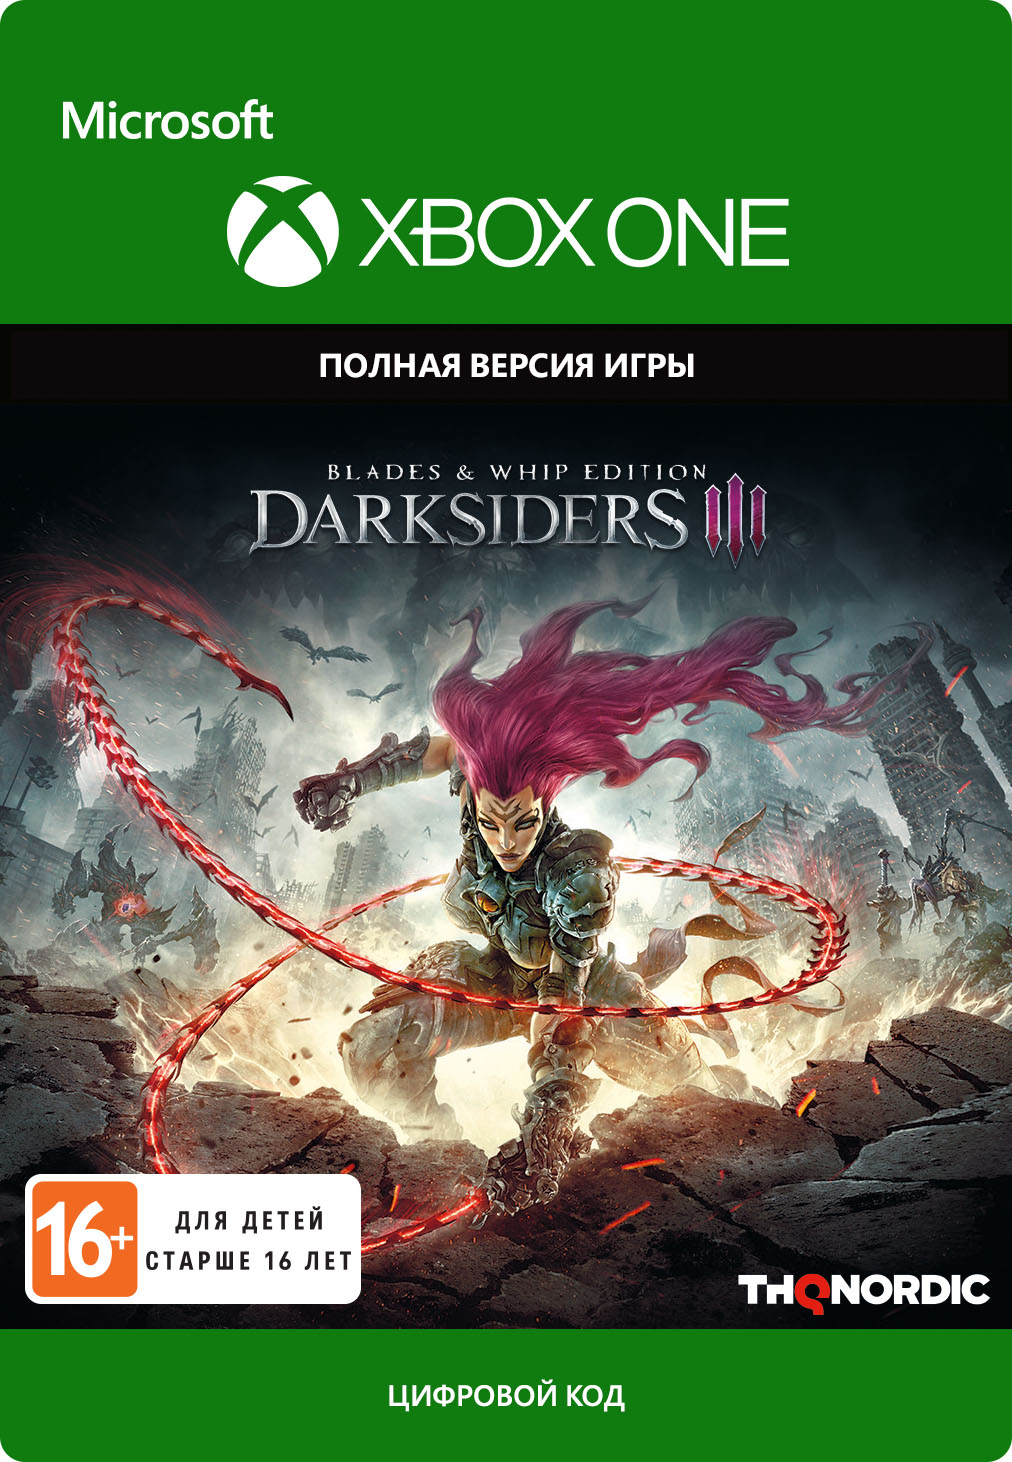 darksiders iii: blades & whips edition [xbox one